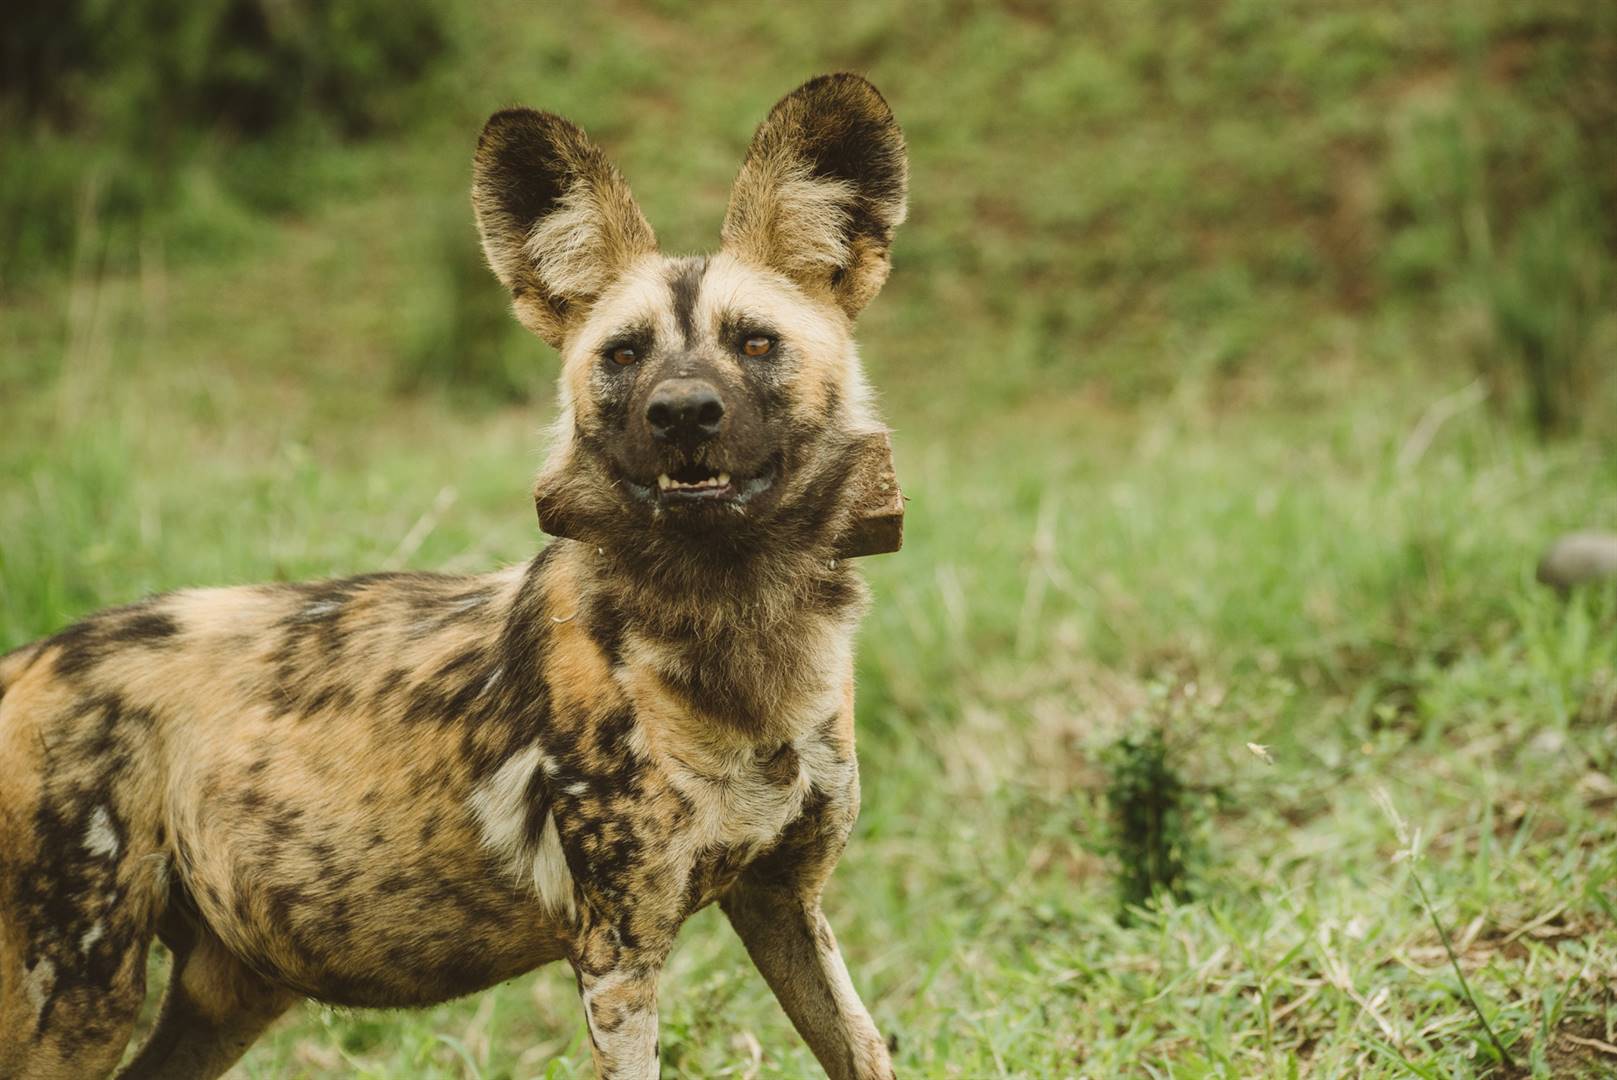 A new pack of nine wild dogs has been released in Hluhluwe Imfolozi Park. The new pack, named the “Mbulunga Pack” after the area where they were held in a boma to acclimatise to their new home before release PHOTO: CASEY PRATT/Love Africa Marketing